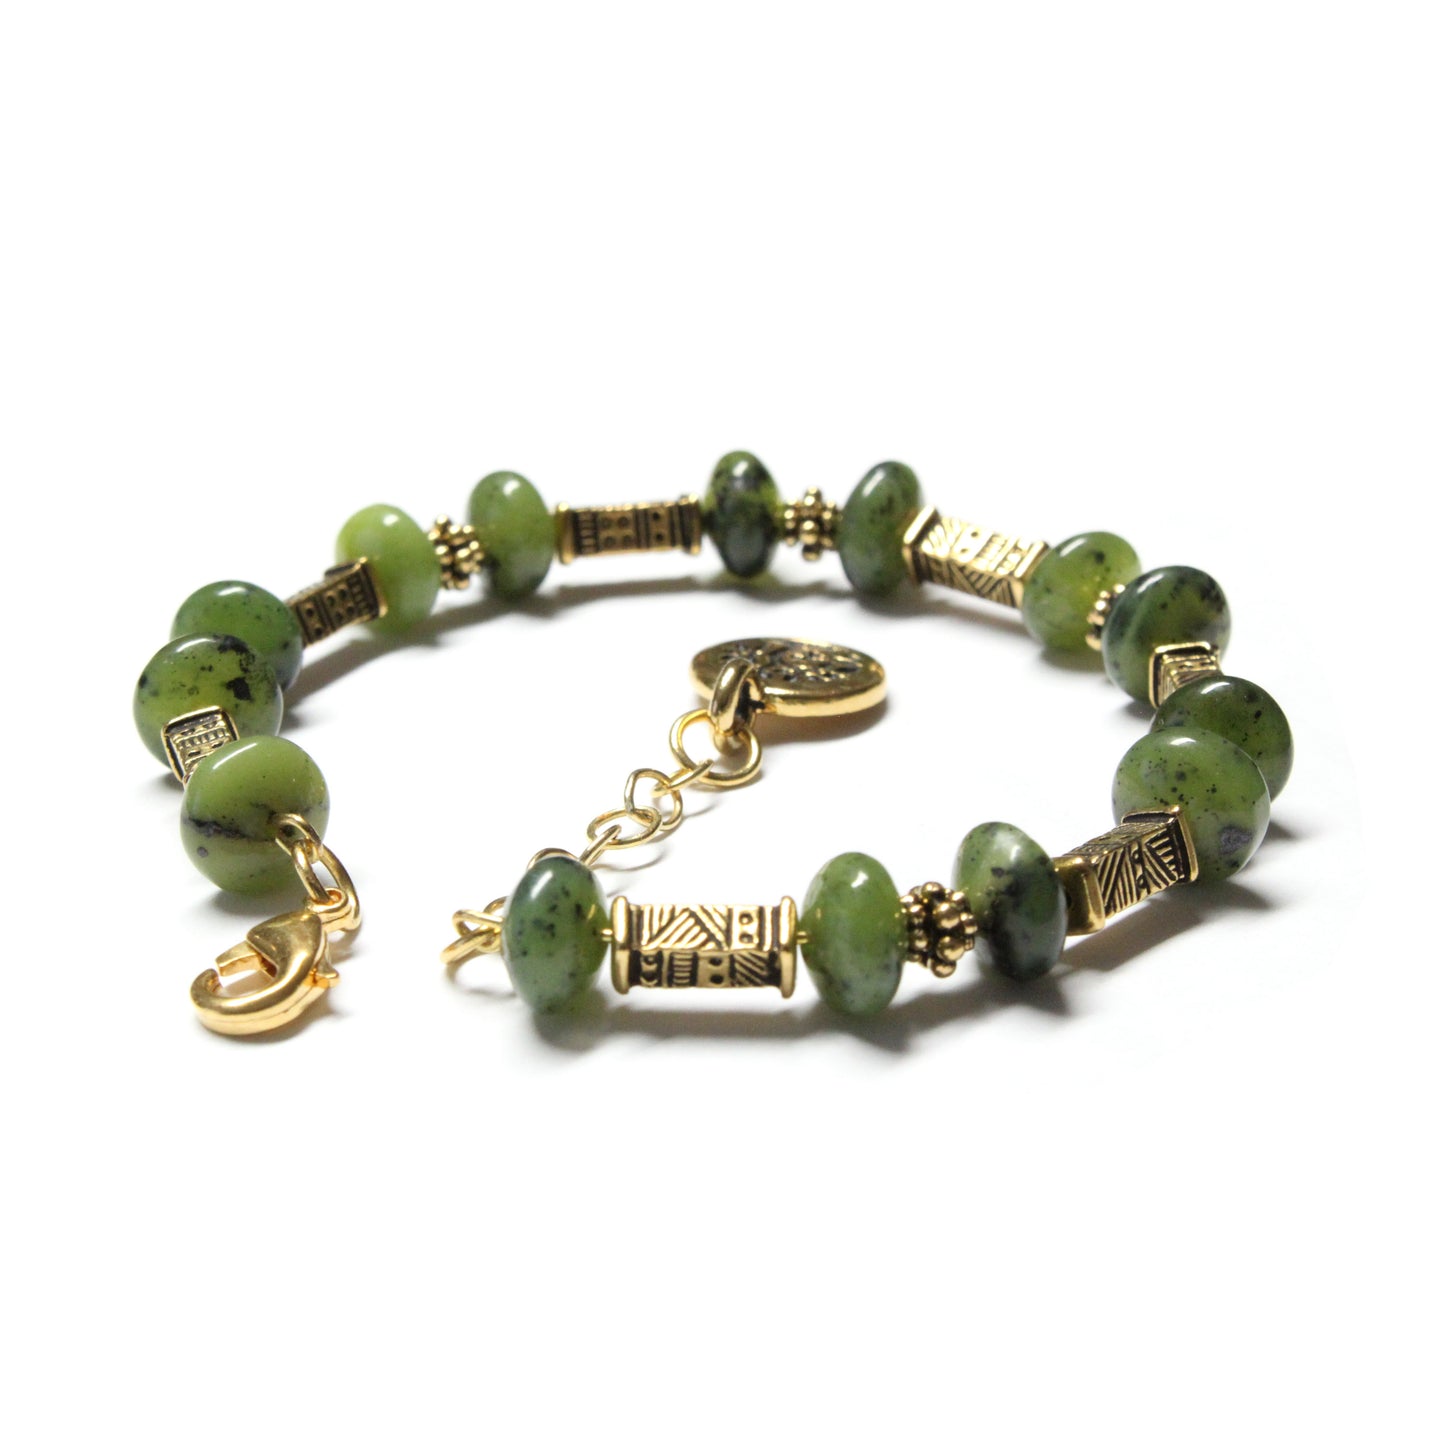 Green Serpentine Bracelet with tree charm / 6 to 7 Inch wrist size / tribal ethnic gold pewter beads / extender chain